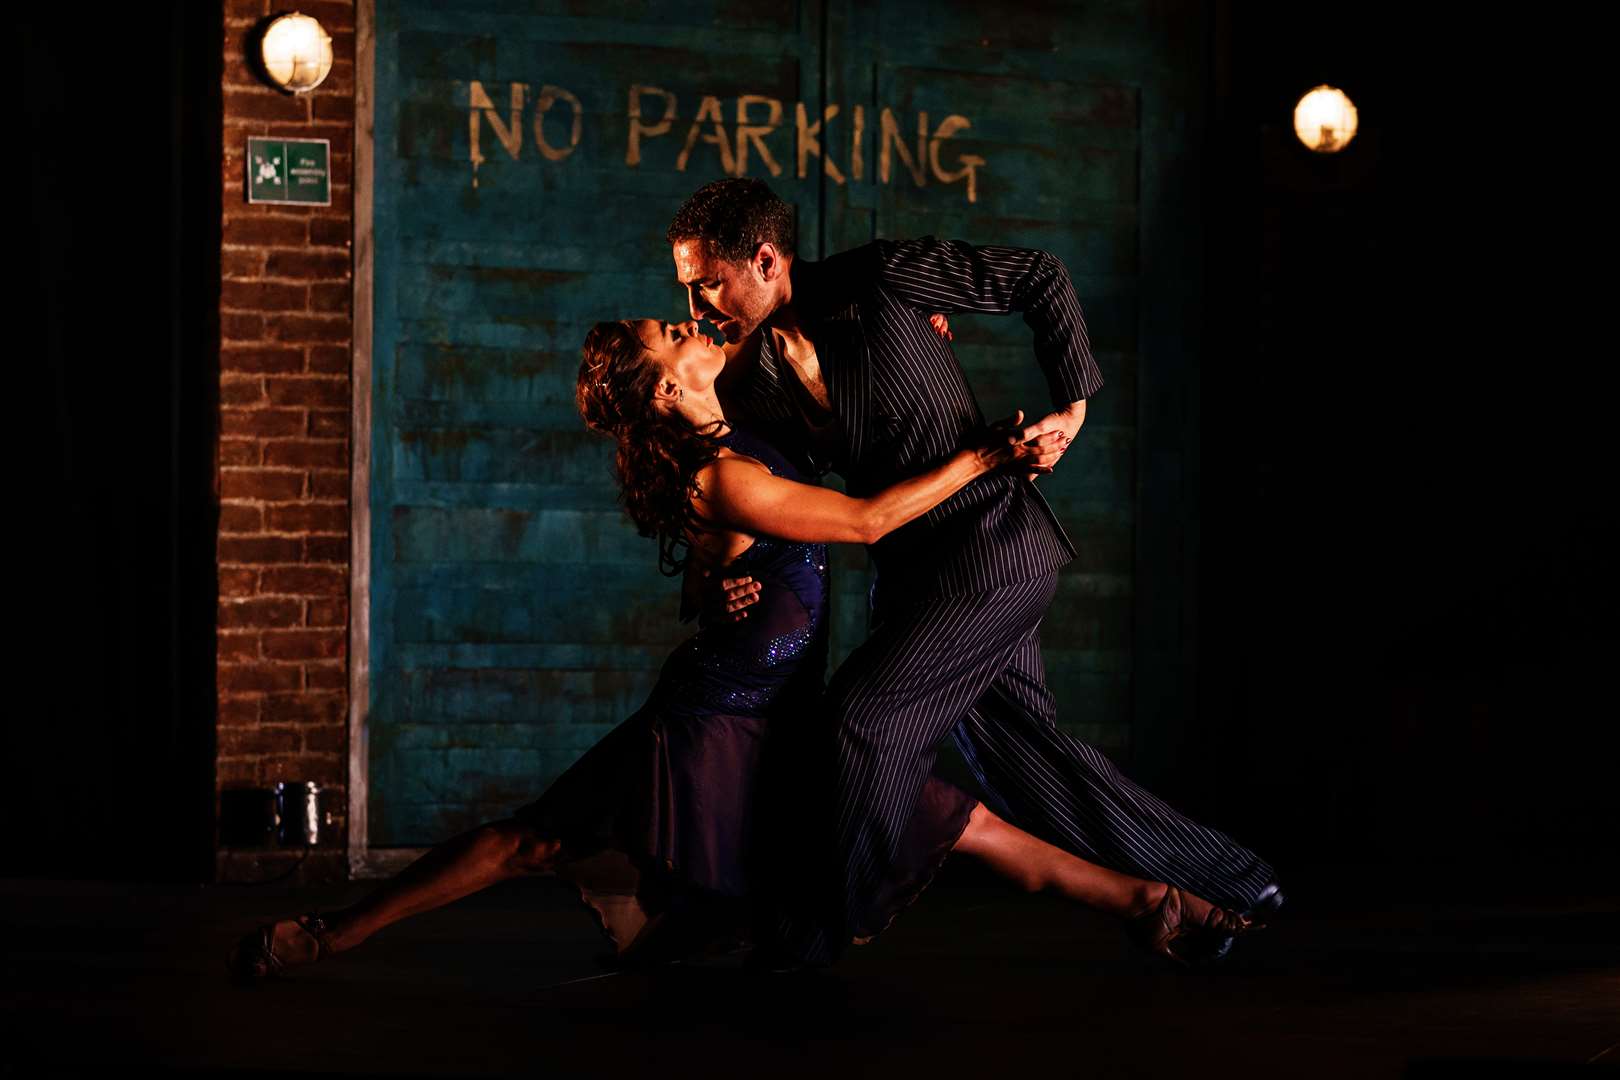 Vincent Simone and Flavia Cacace in Tango Moderno, photo by Manuel Harlan (14) (1244047)